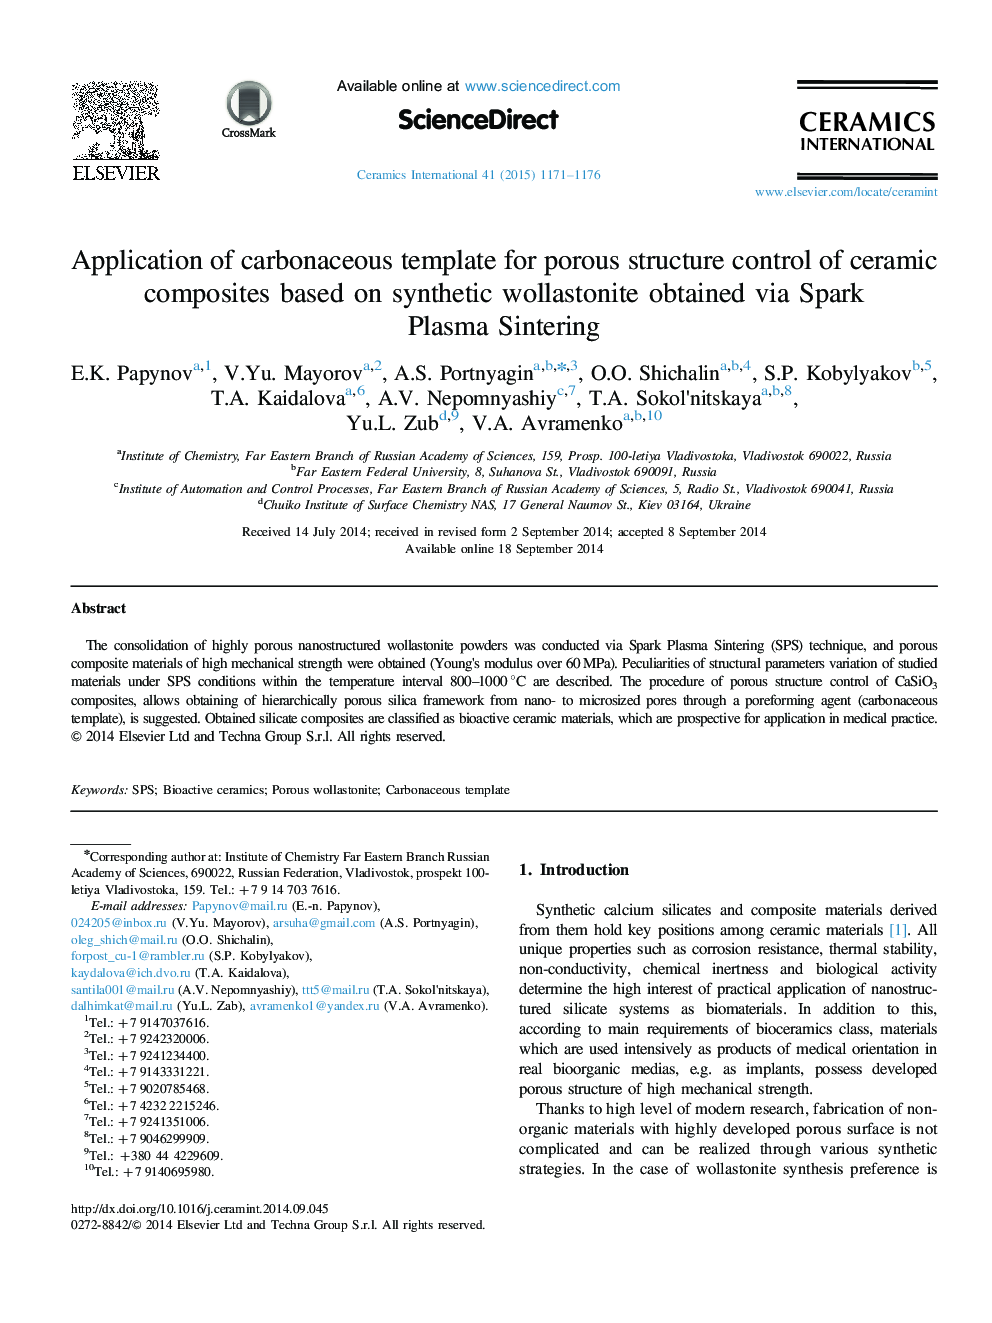 Application of carbonaceous template for porous structure control of ceramic composites based on synthetic wollastonite obtained via Spark Plasma Sintering